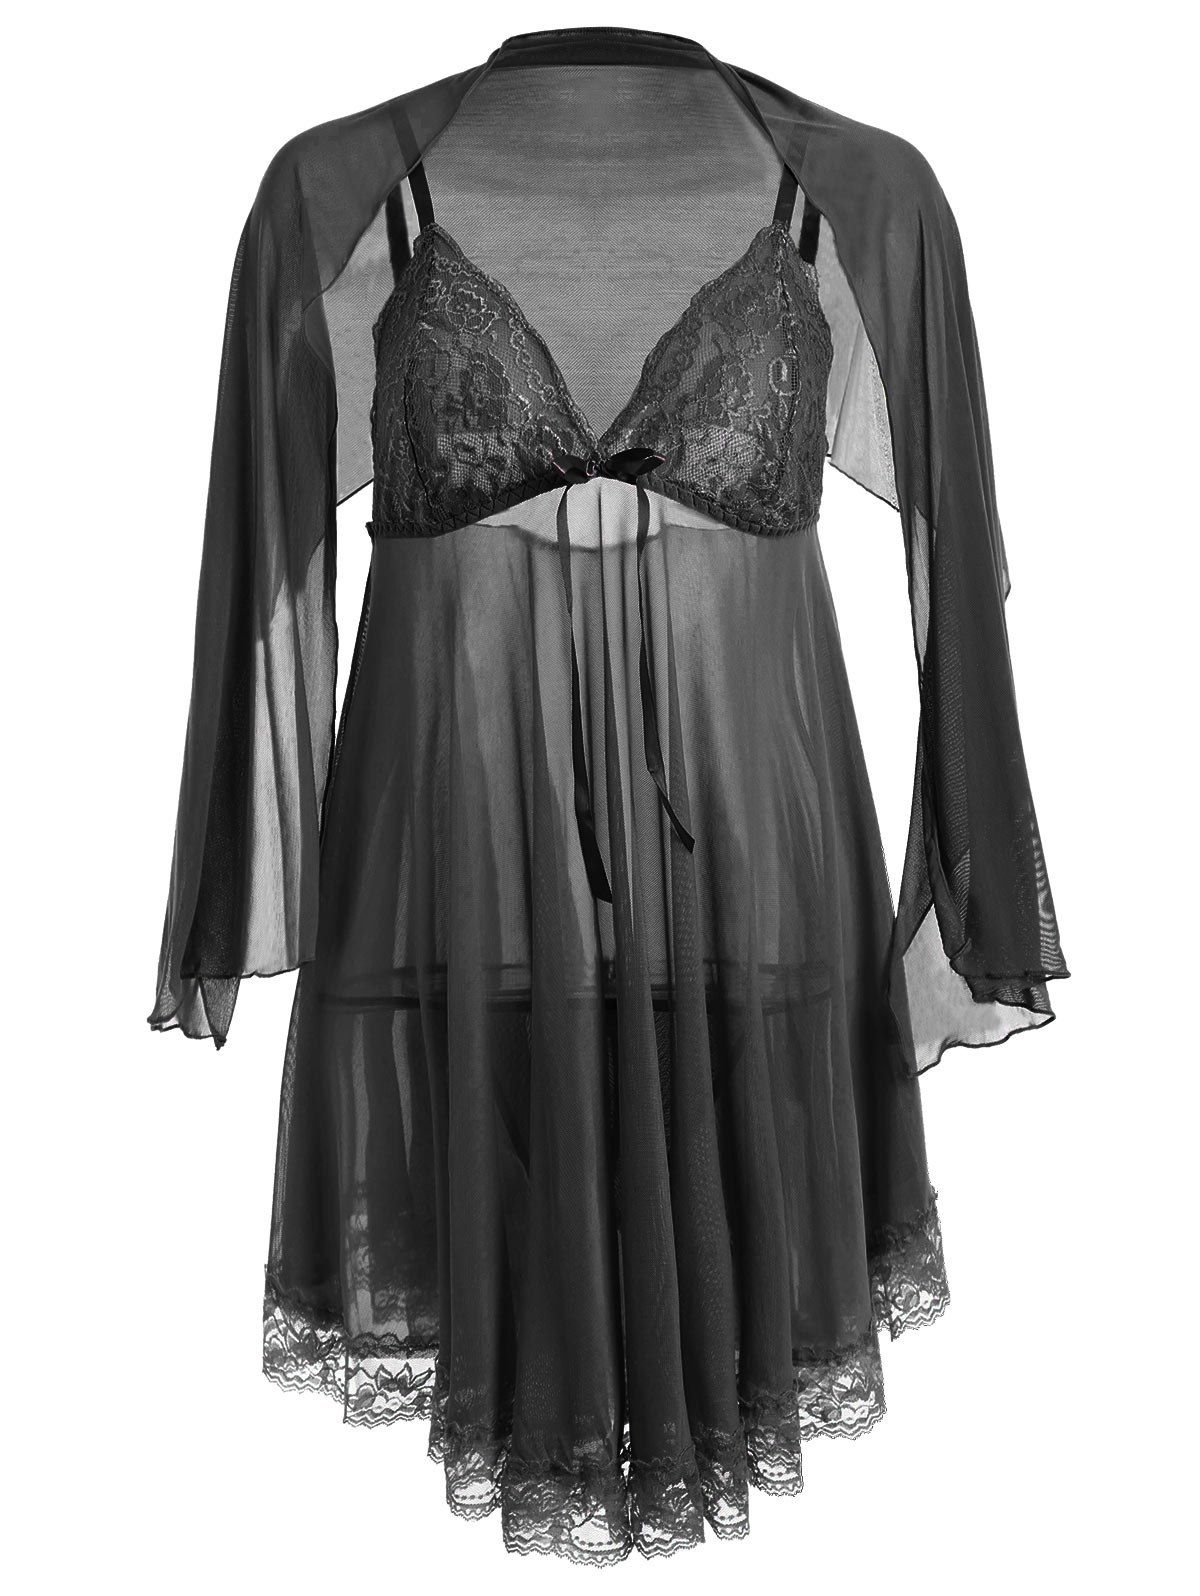 [41% OFF] 2021 Plus Size Mesh Sheer Babydoll Dress With Cape In BLACK ...